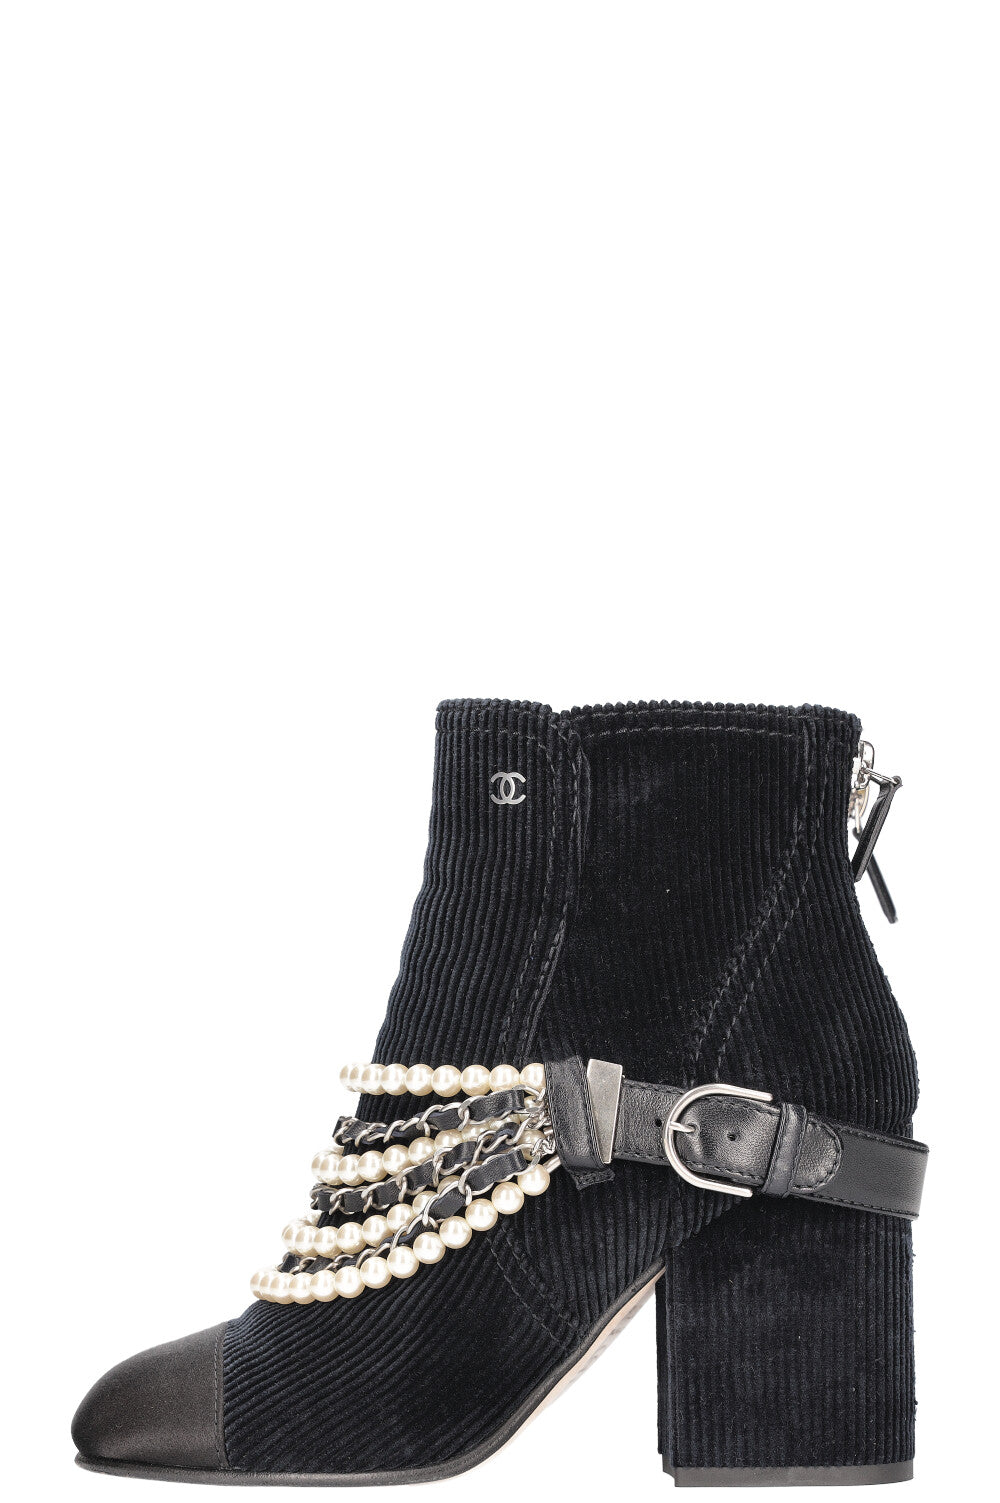 CHANEL Boots with Pearl Chain Cord & Satin Navy